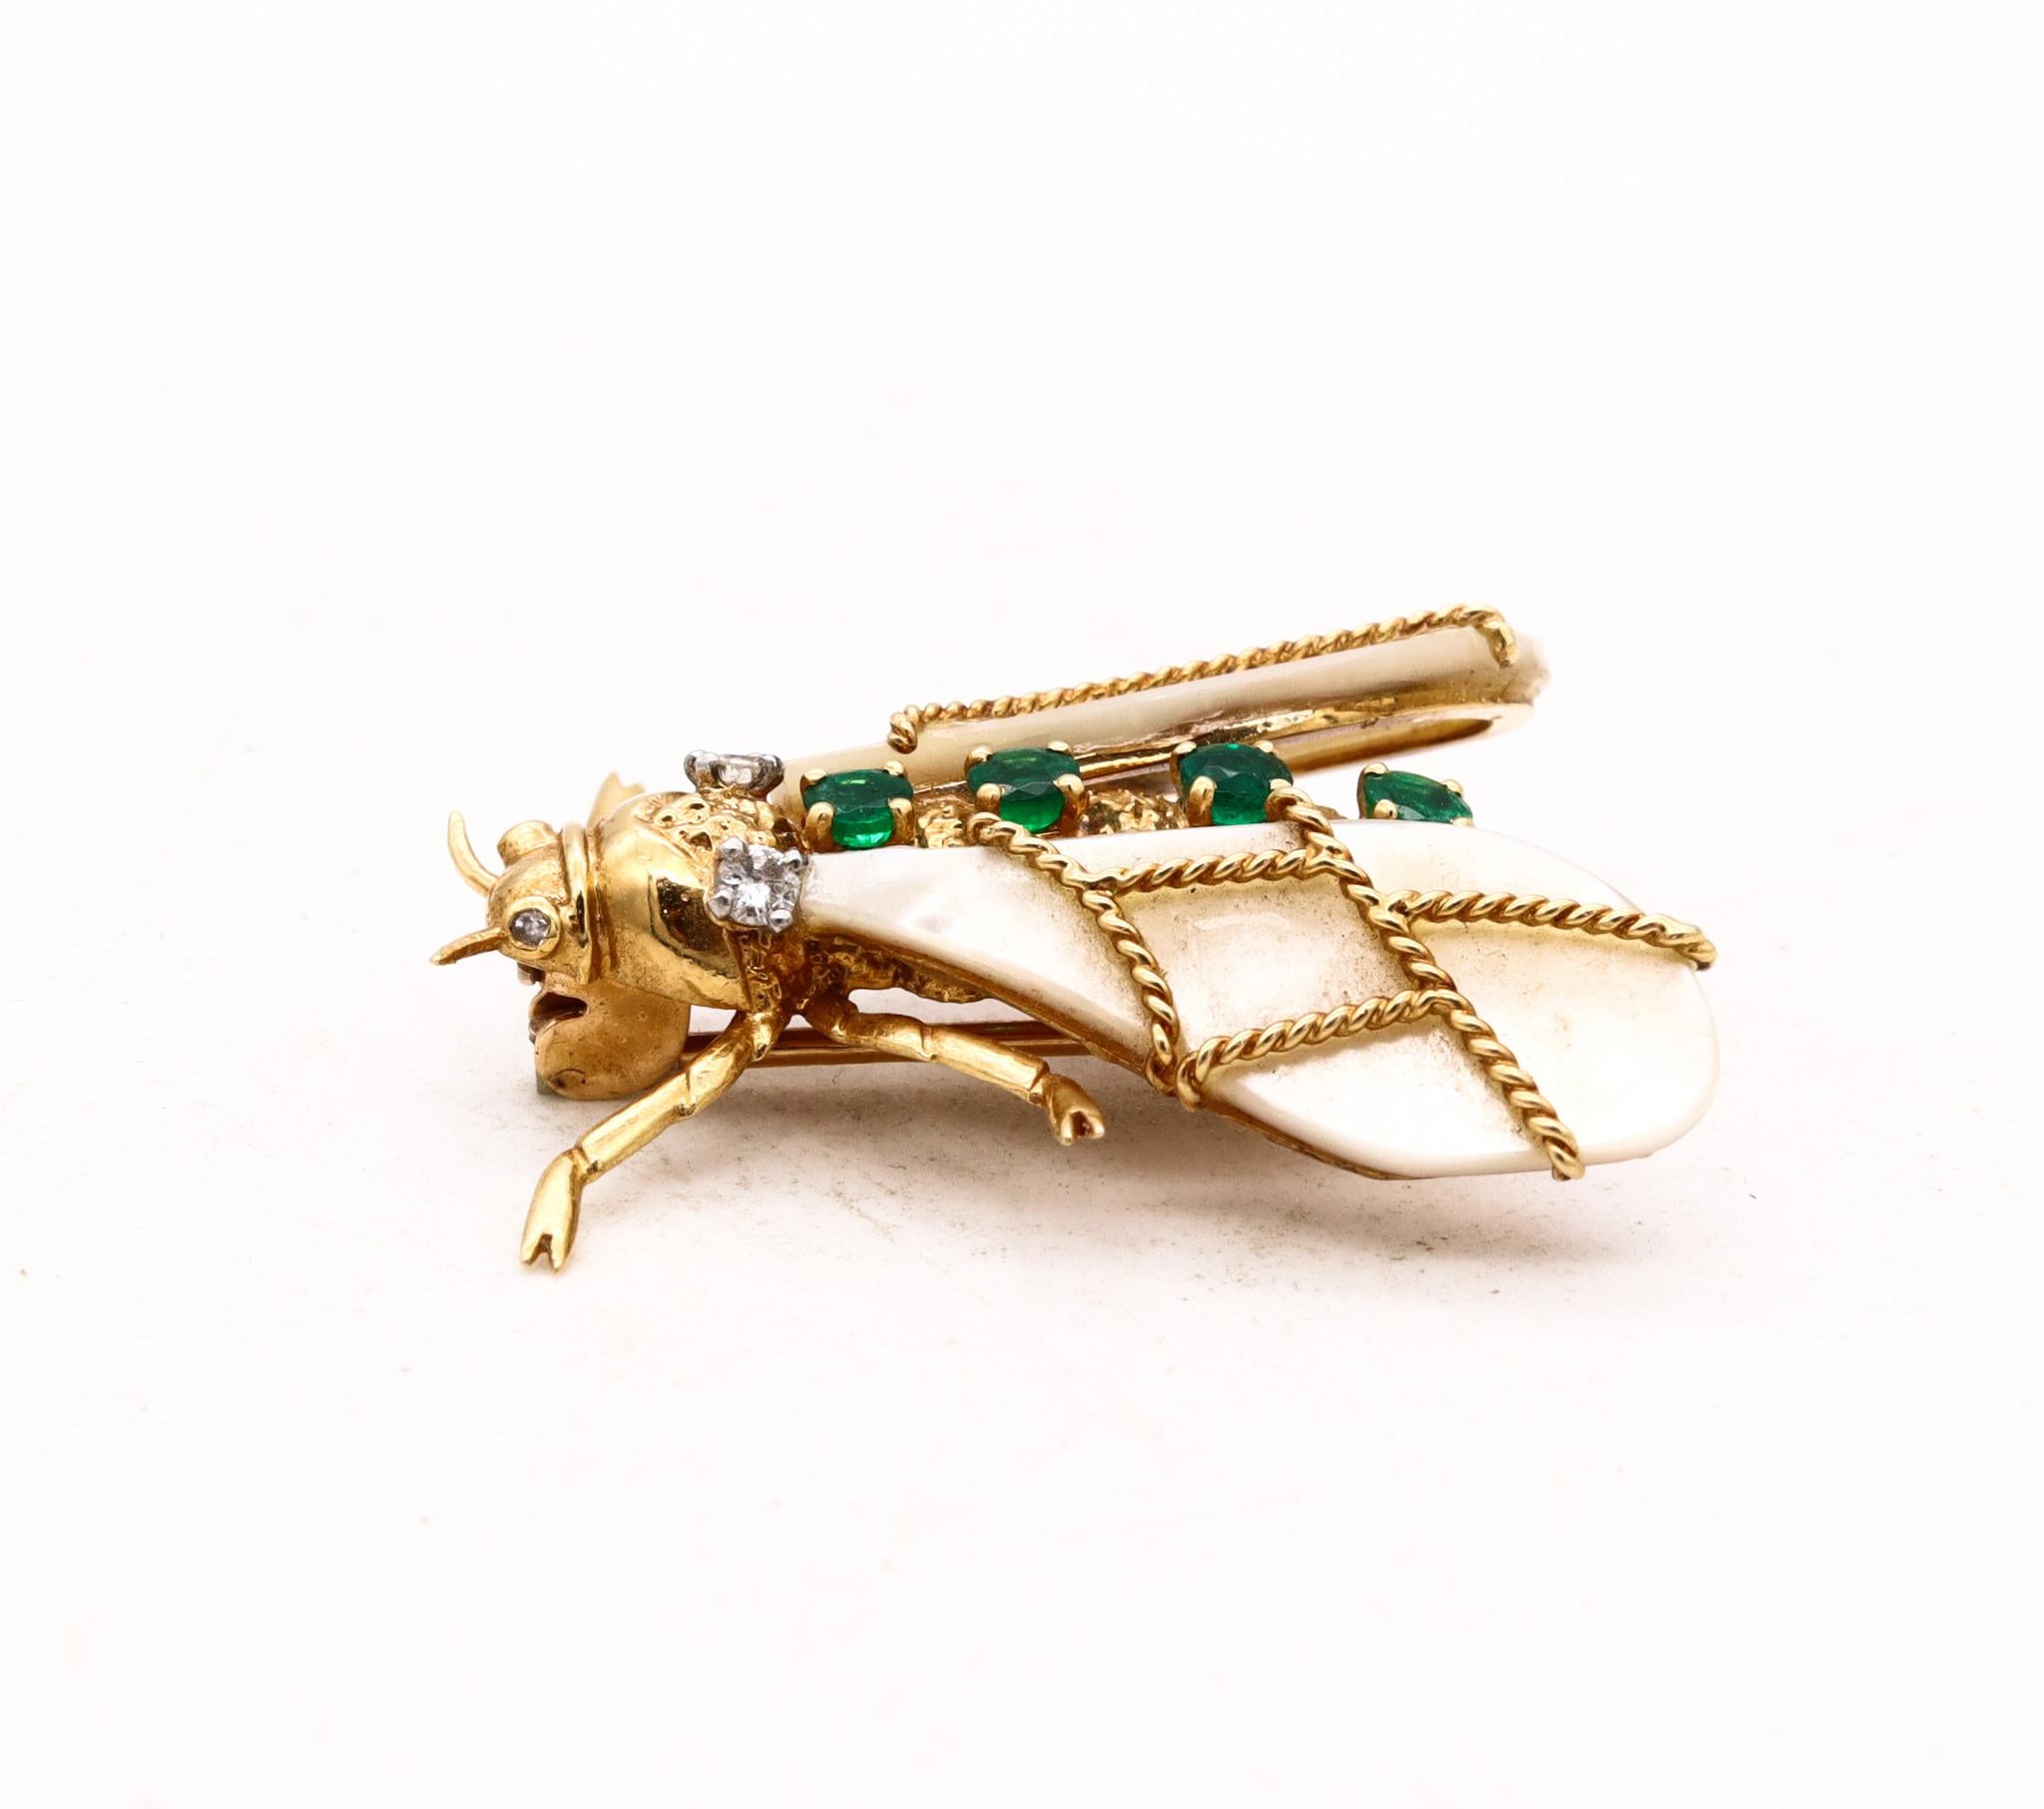 Mixed Cut Chaumet Paris 1960 Jeweled Bee Brooch in 18Kt Yellow Gold with Diamonds Emeralds